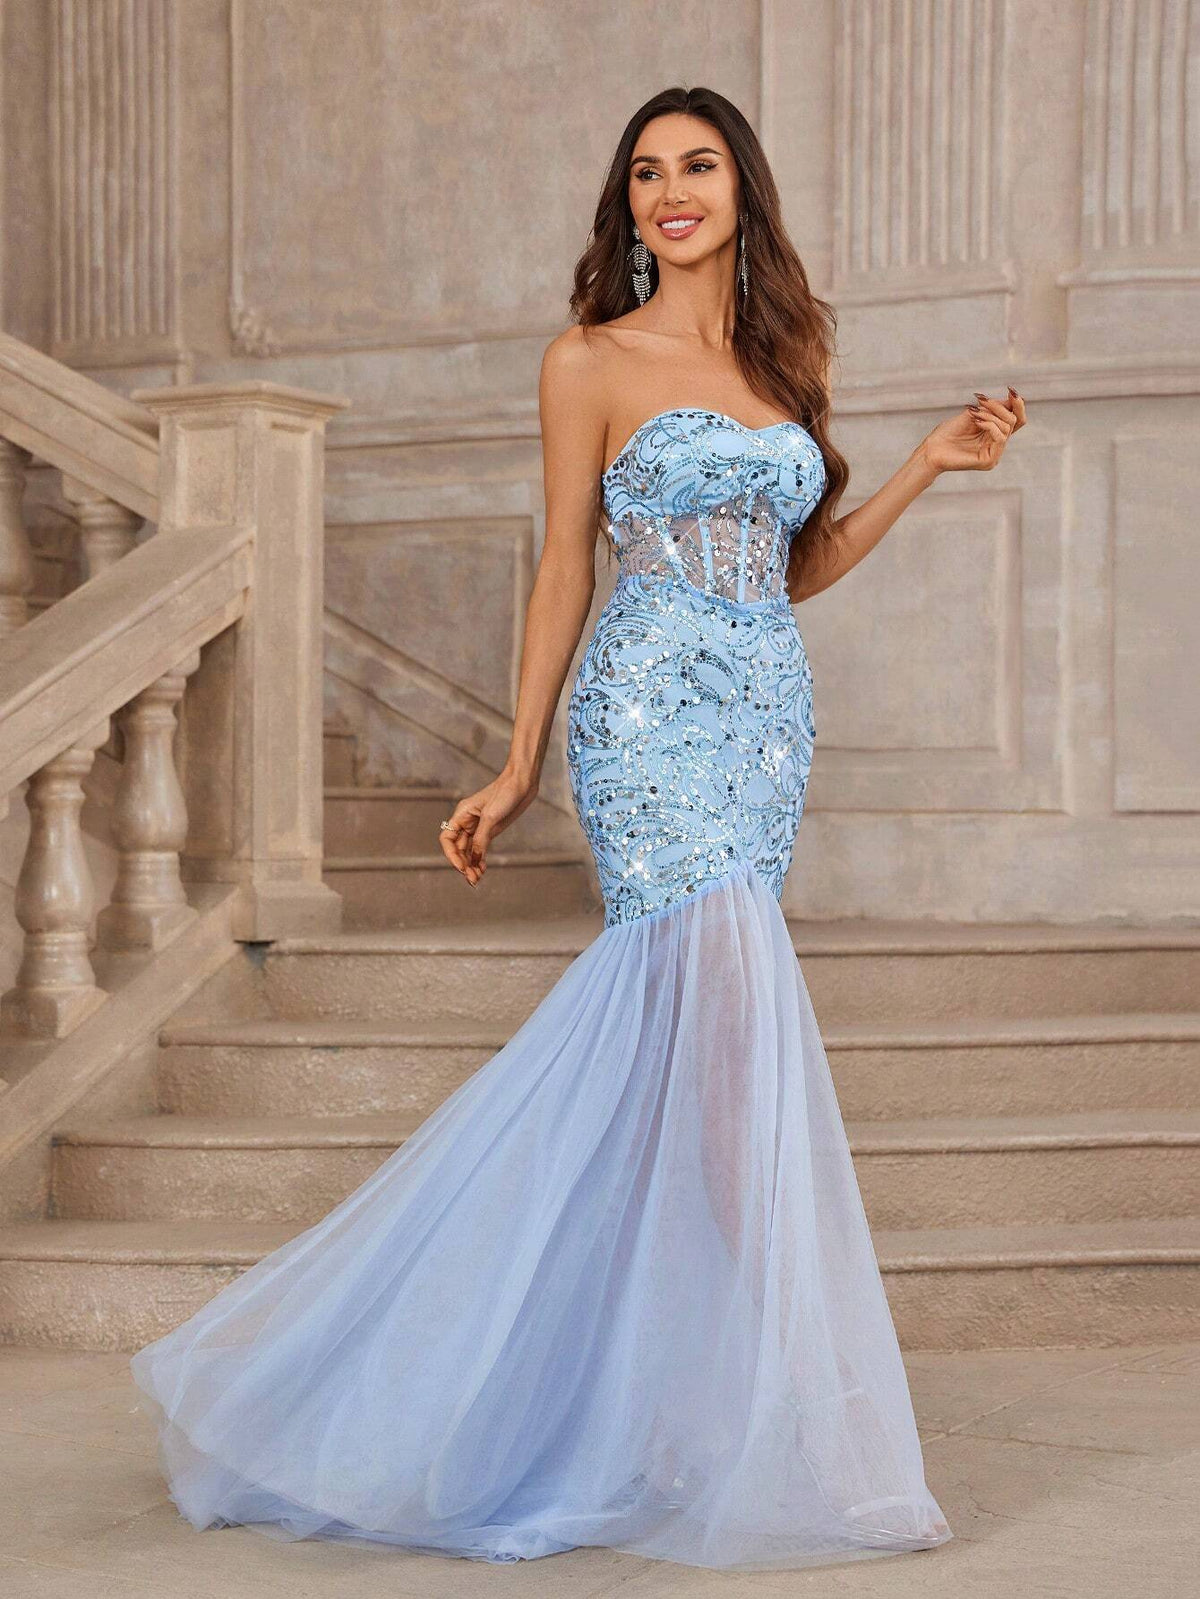 Gorgeous Strapless Neckline Design With Waist Cutout, Sheer Panel Insertions, Embroidery And Beads Decoration, Mesh And Shiny Fish Tail Skirt, Perfect For Evening Party Formal Event.